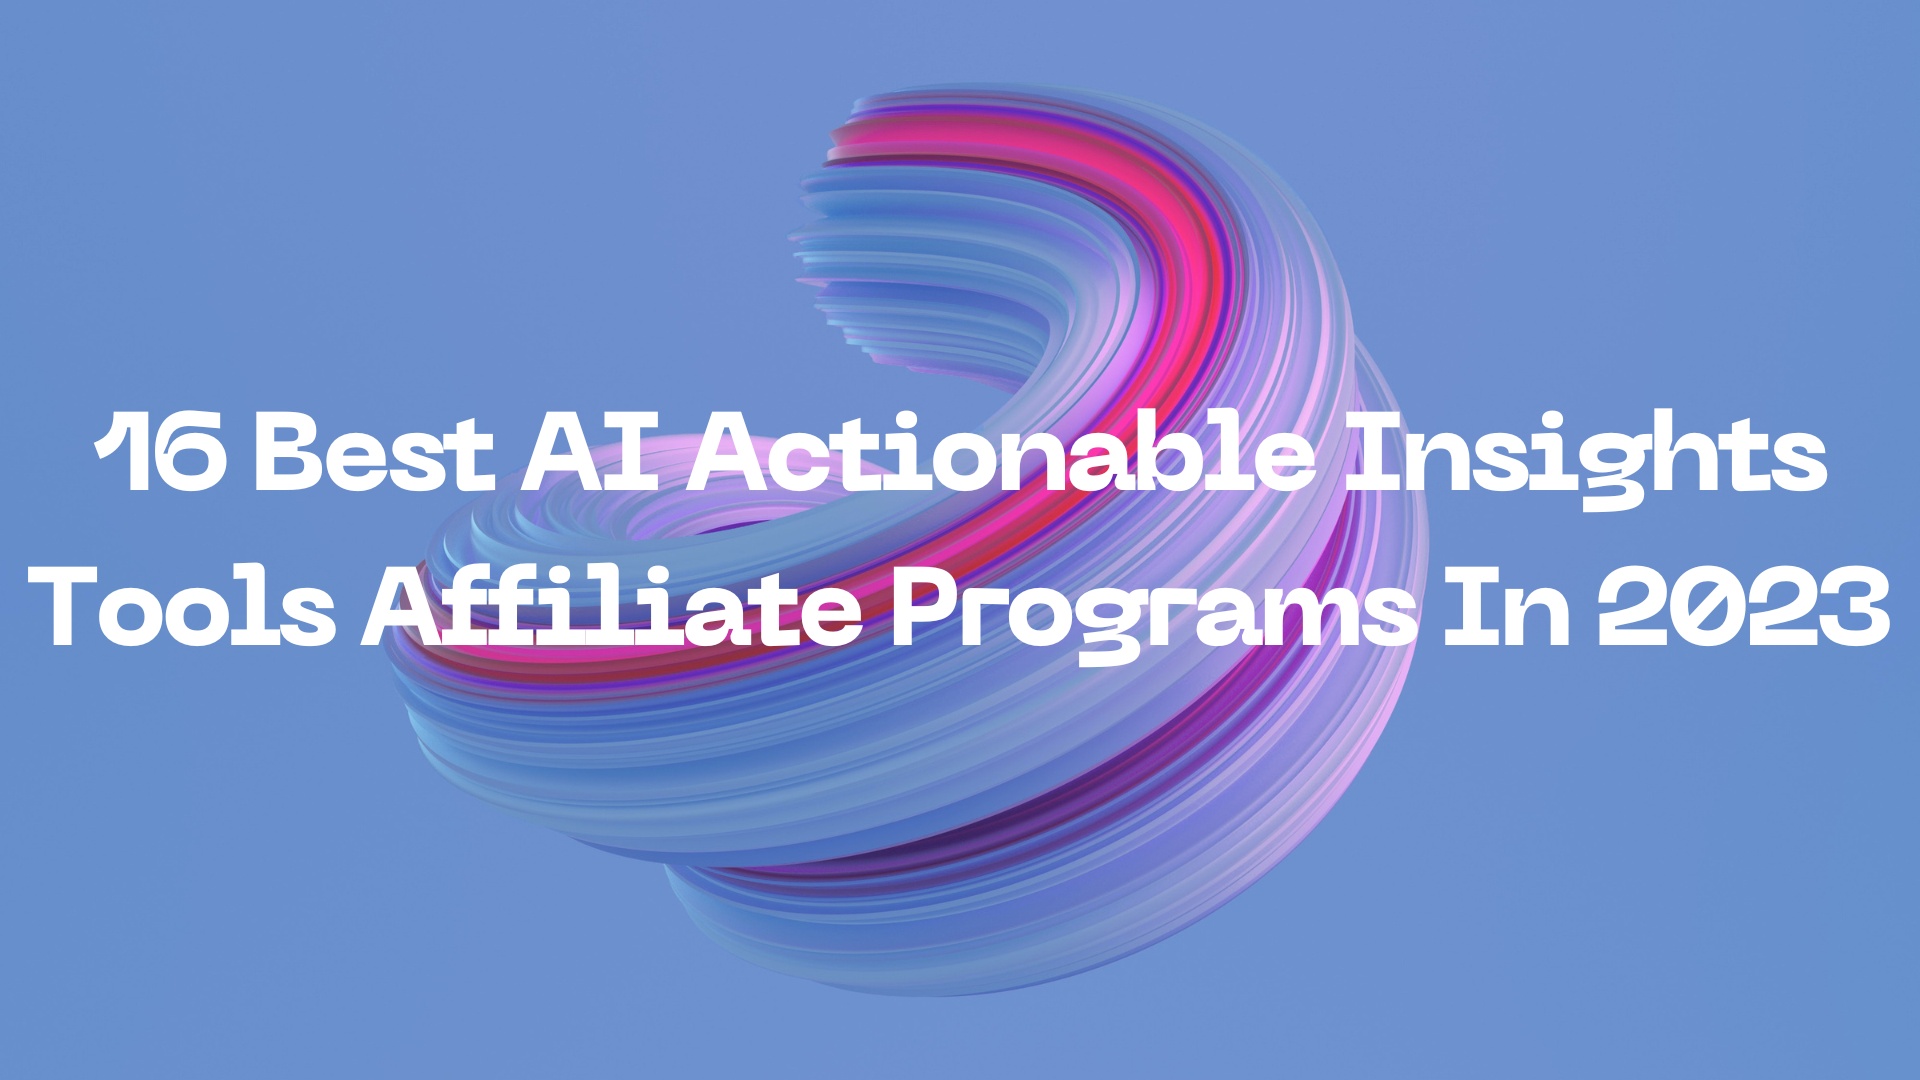 16 Best AI Actionable Insights Tools Affiliate Programs In 2023